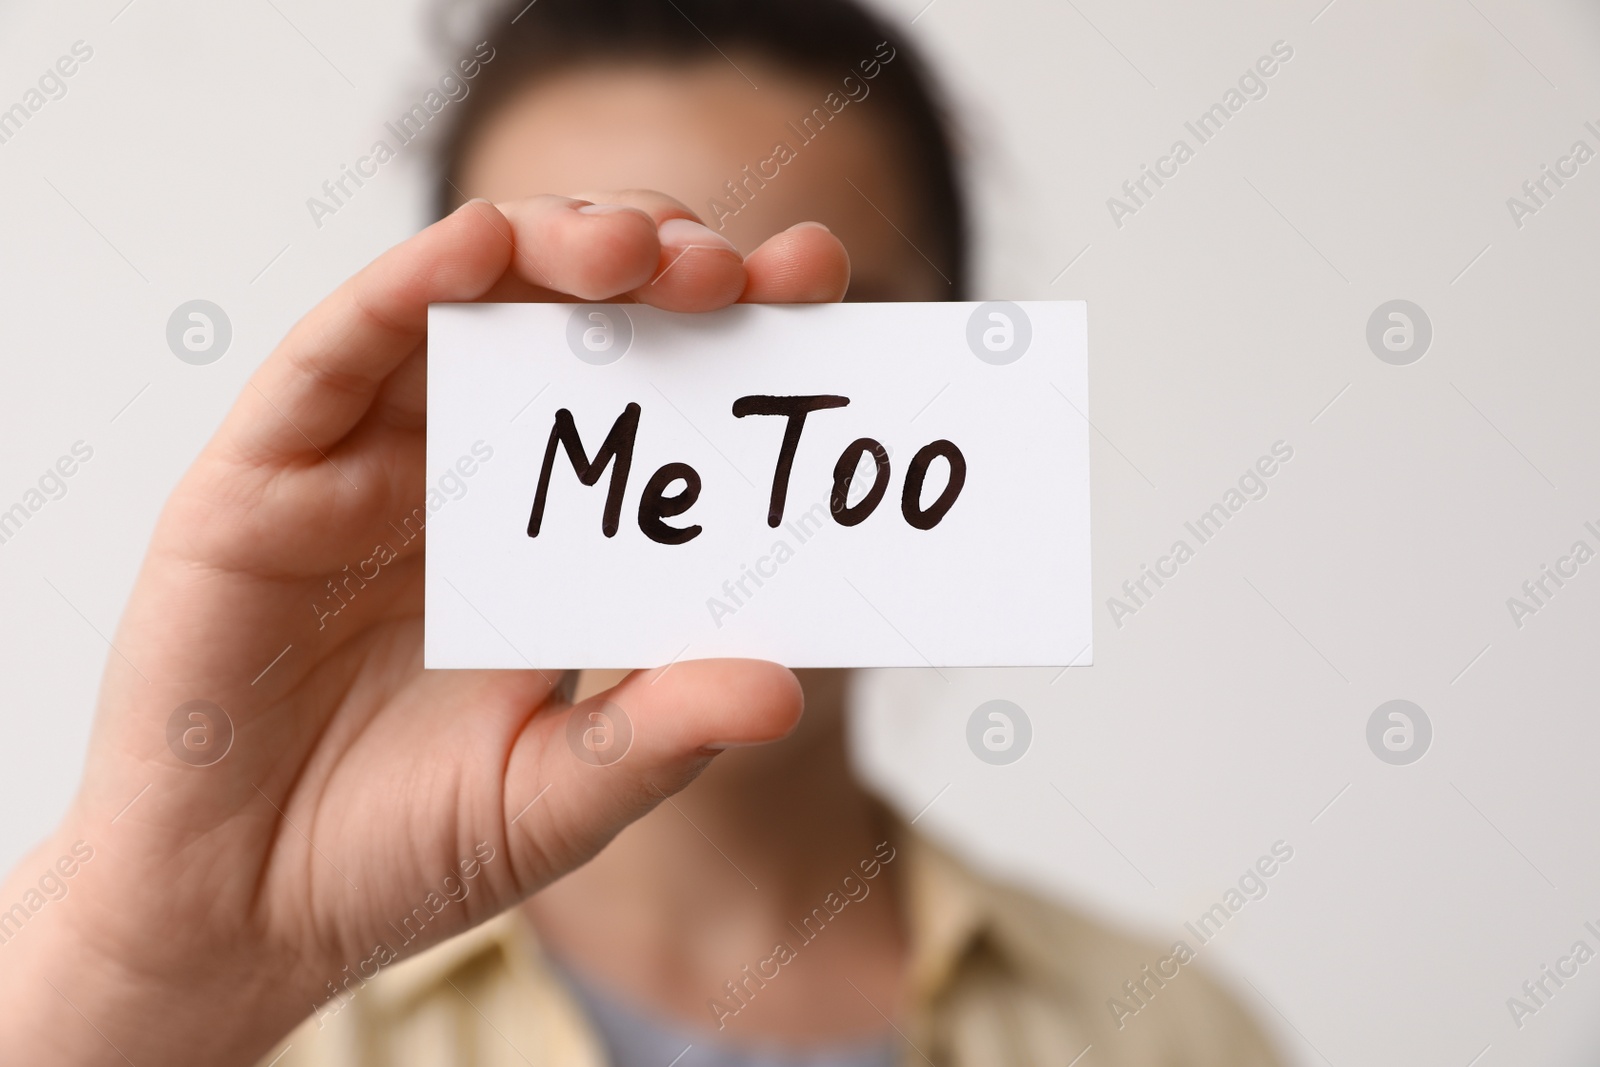 Photo of Woman holding paper with text MeToo against light background, closeup. Stop sexual assault